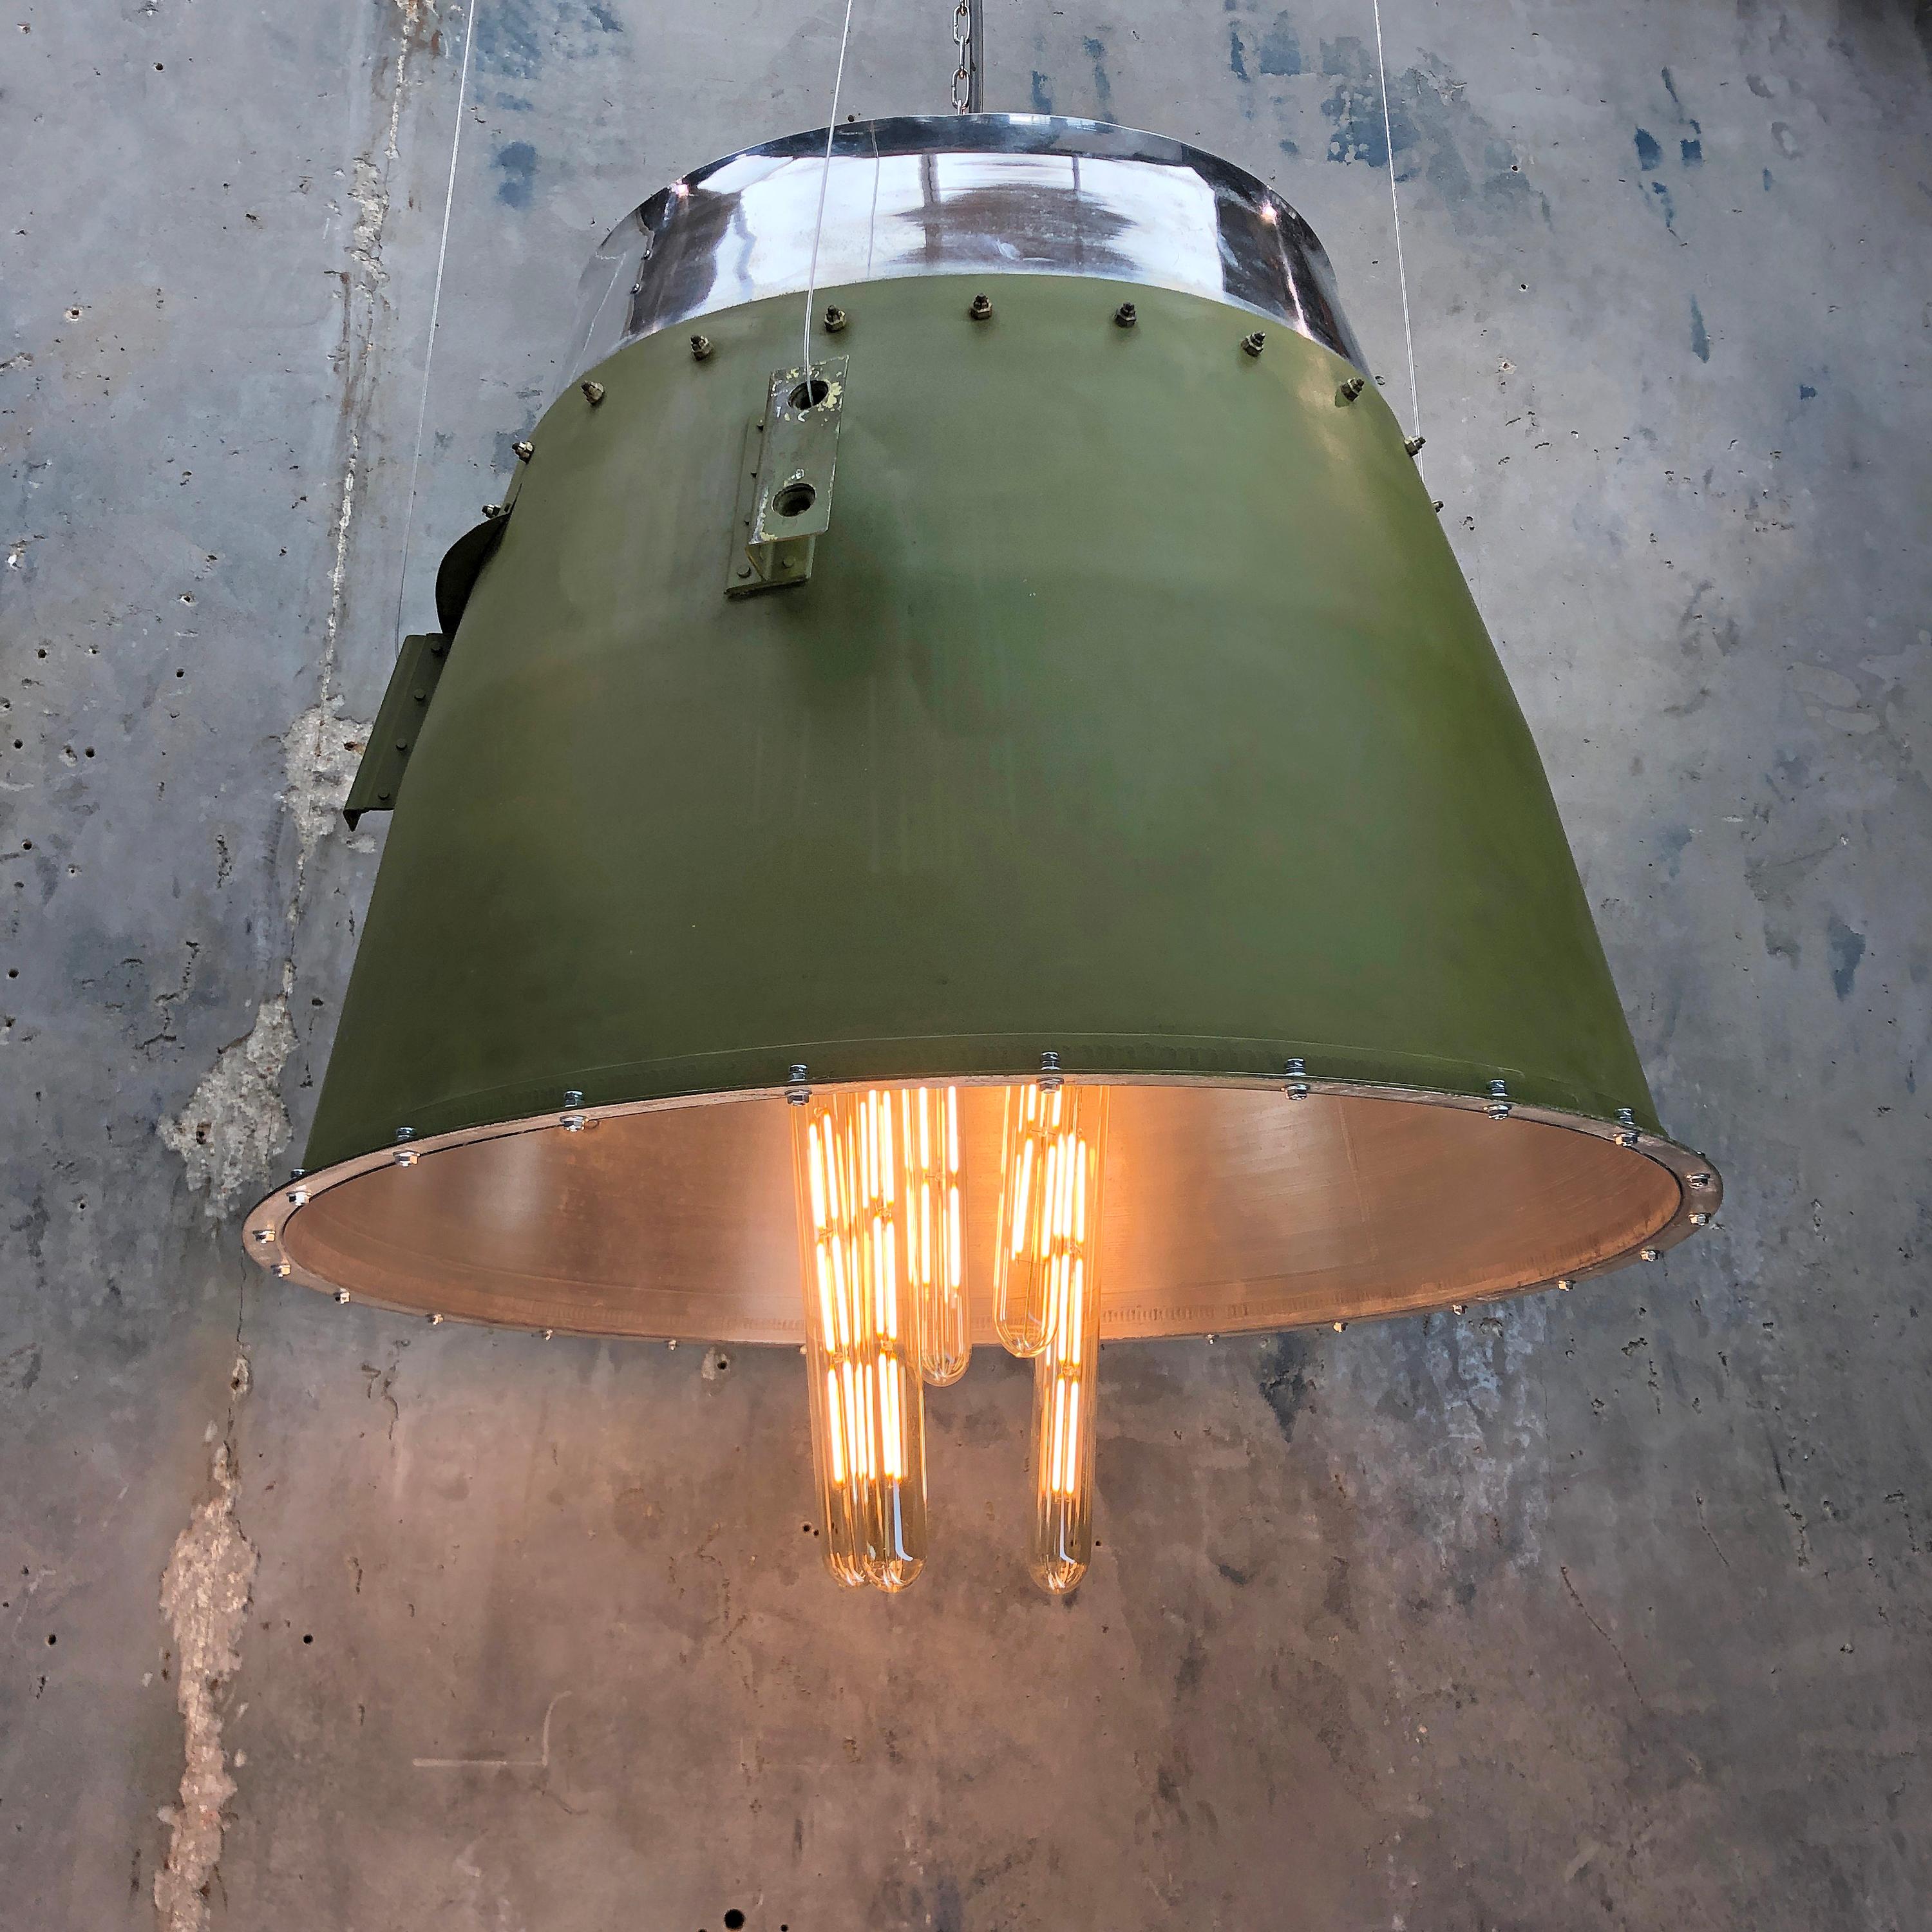 Spun 1980s Canadian Bombardier Jet Engine Cowling, Green Industrial Pendant Light